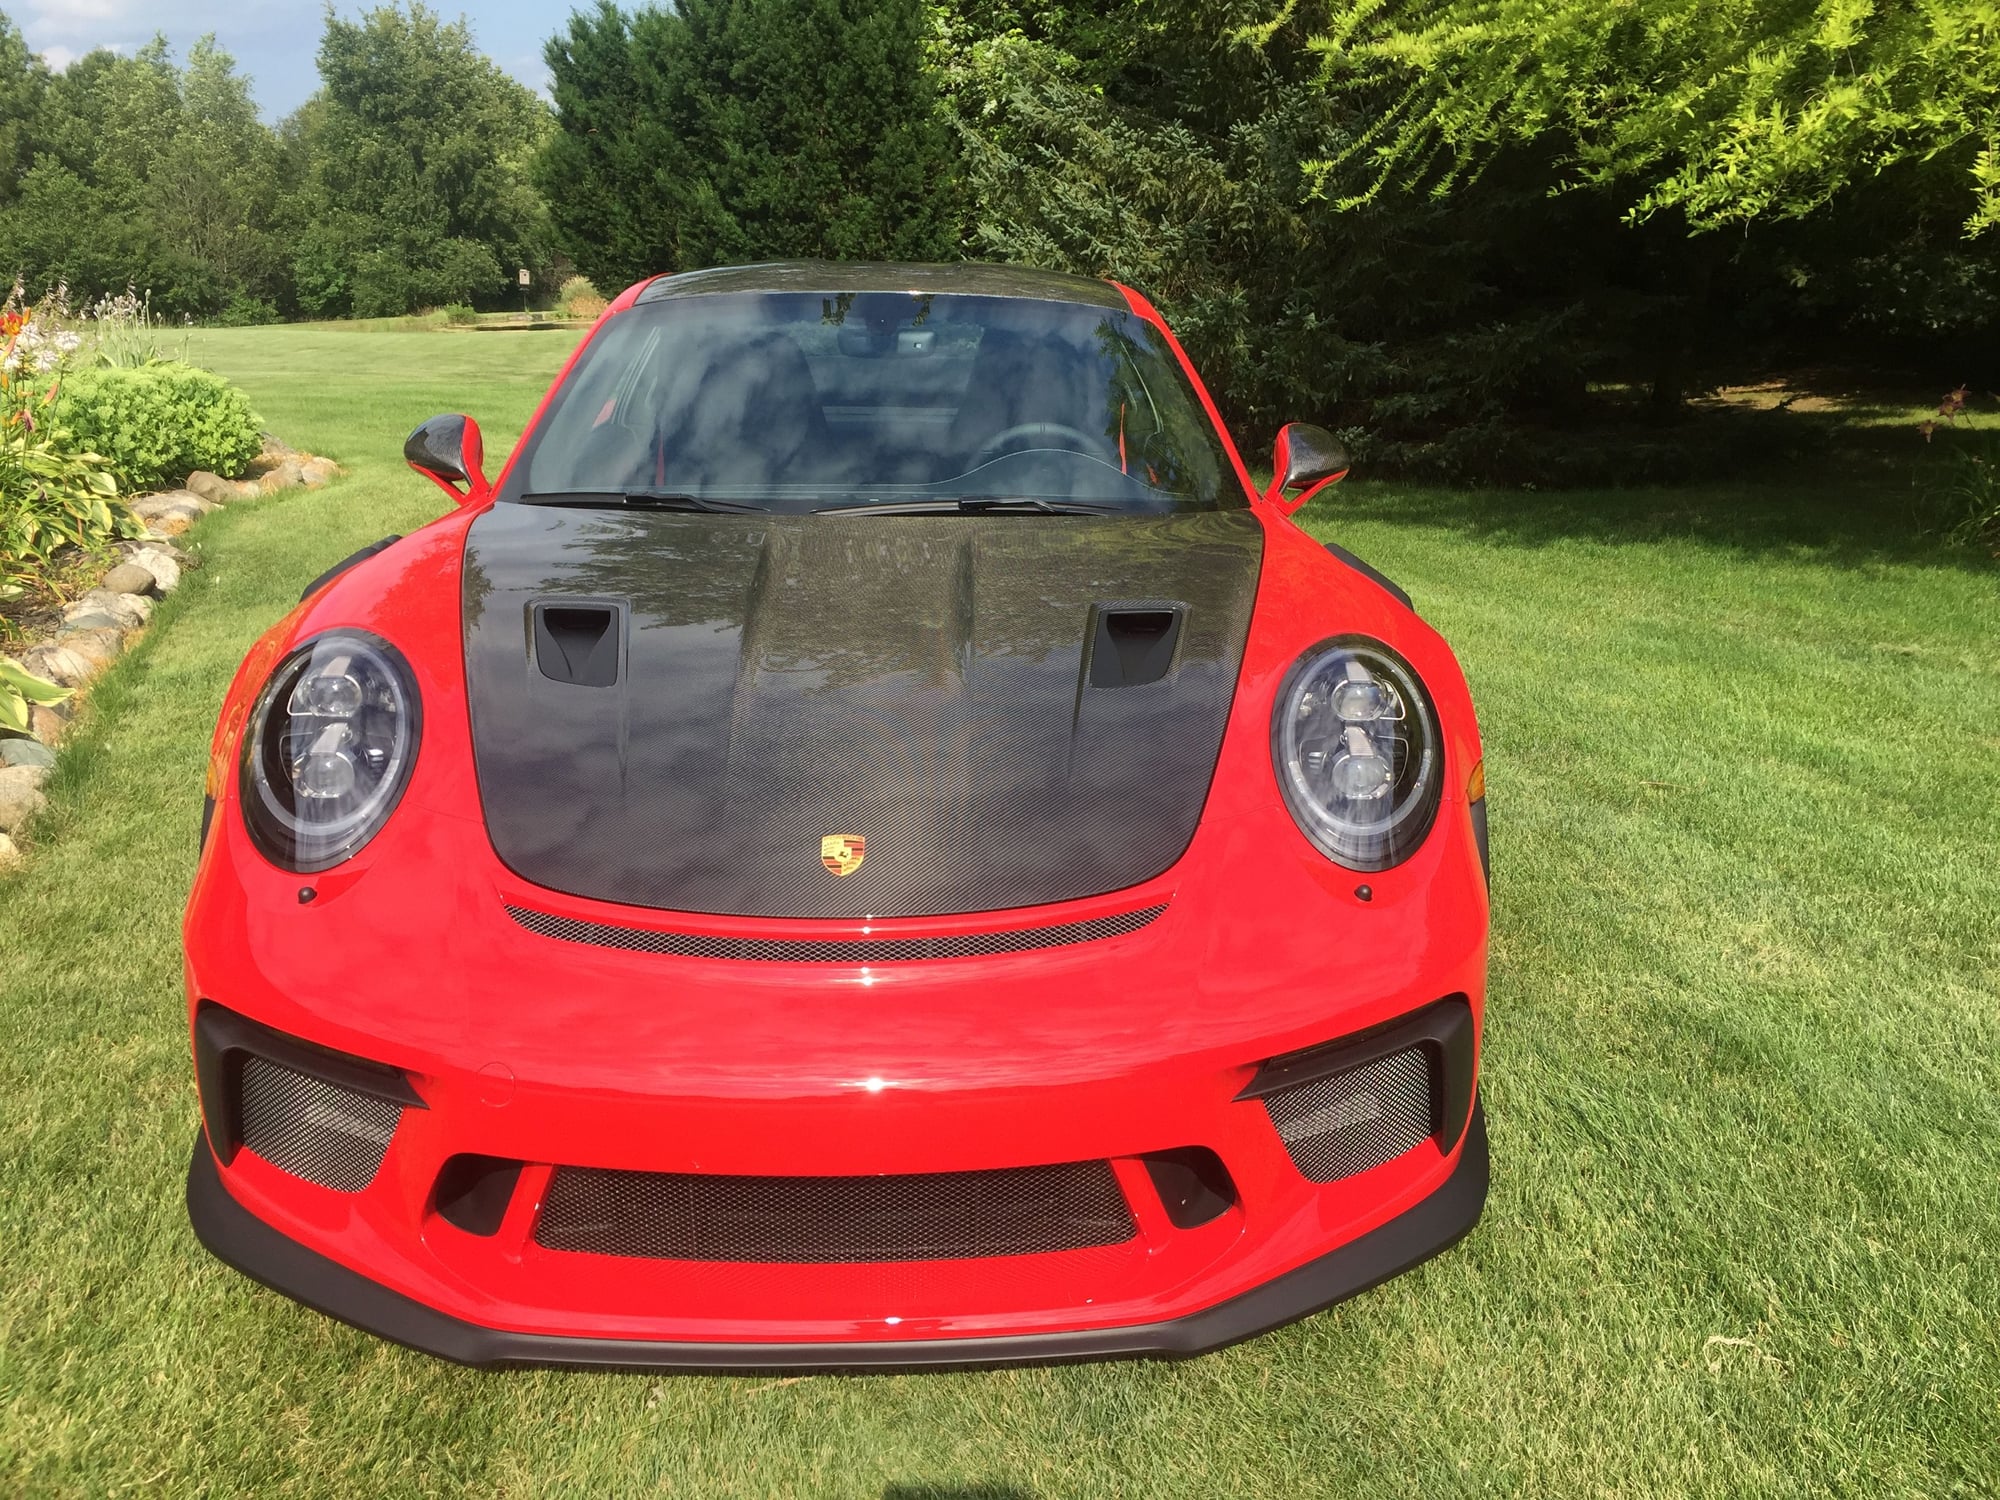 2019 Porsche GT3 - 2019 GT3RS Guard Red with Weissach Package, 225 Miles, Free Xpel Full Body Wrap - Used - VIN WP0AF2A9KS167412 - 225 Miles - 6 cyl - 2WD - Automatic - Coupe - Red - Milwaukee, WI 53201, United States